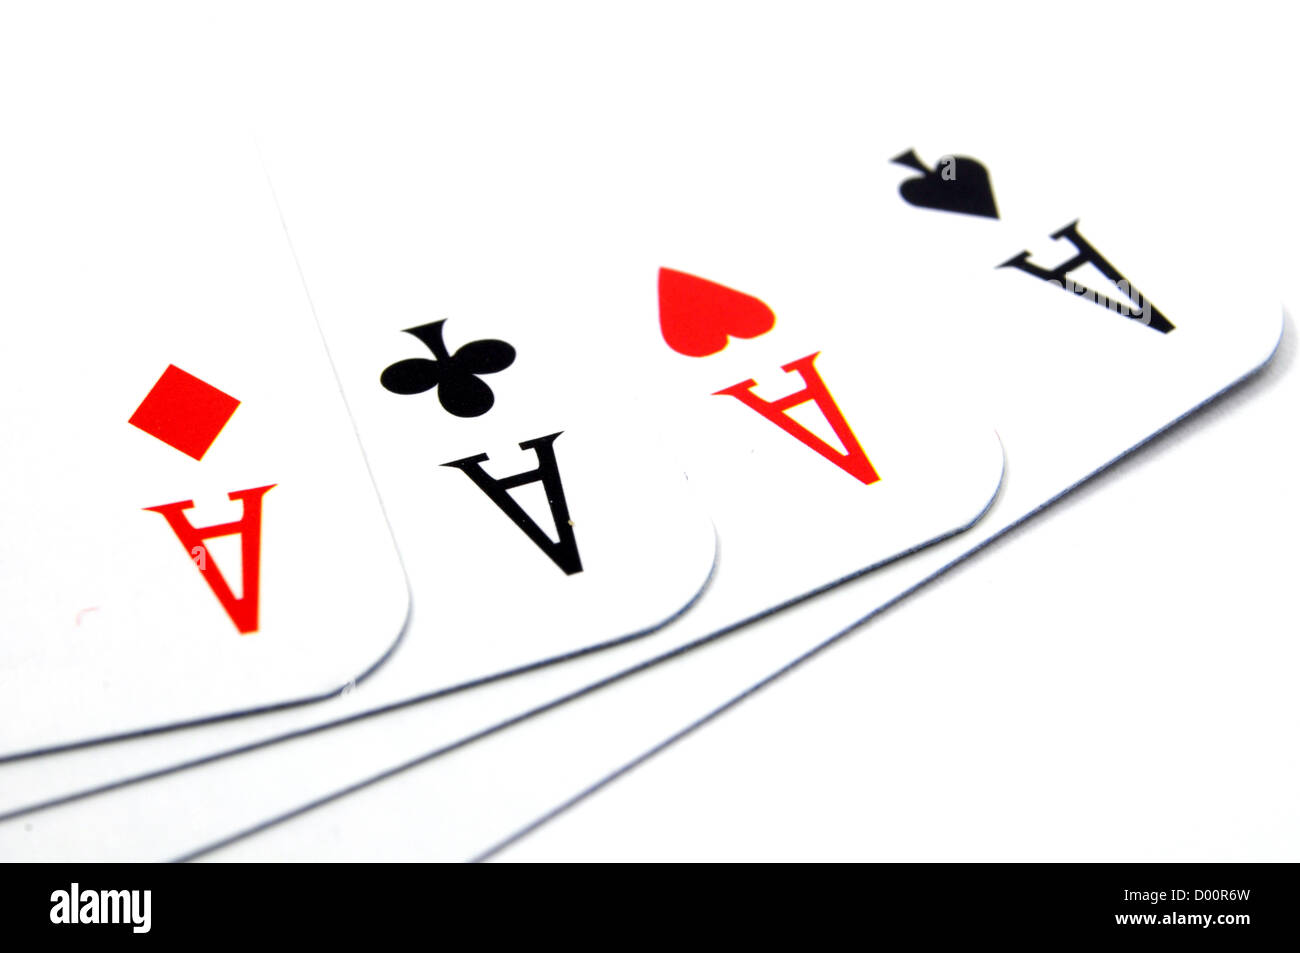 four aces on white showing winning or casino concept Stock Photo